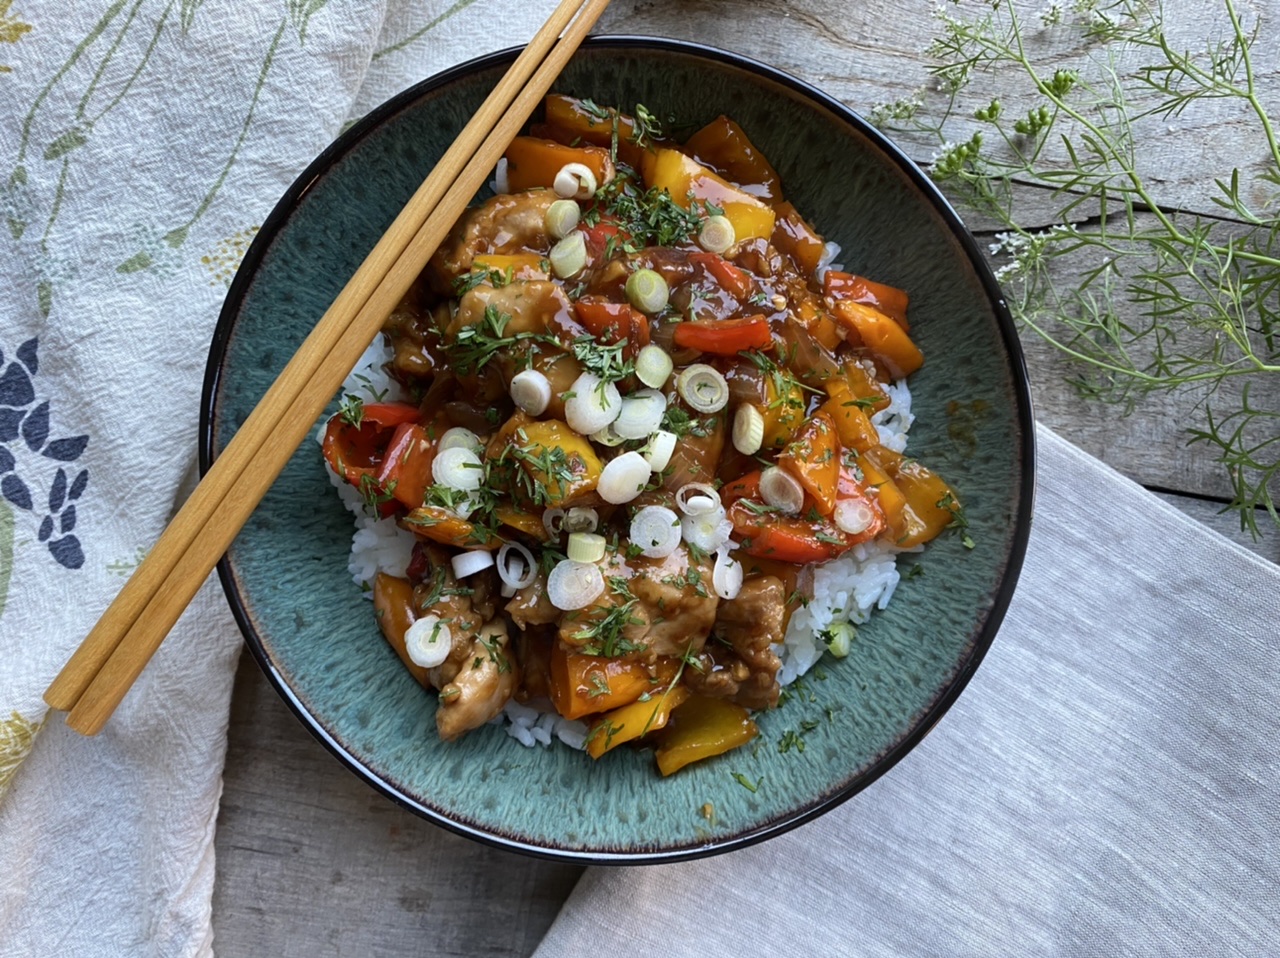 Spicy Orange Chicken with Sweet Peppers - the Old Woman and the Sea